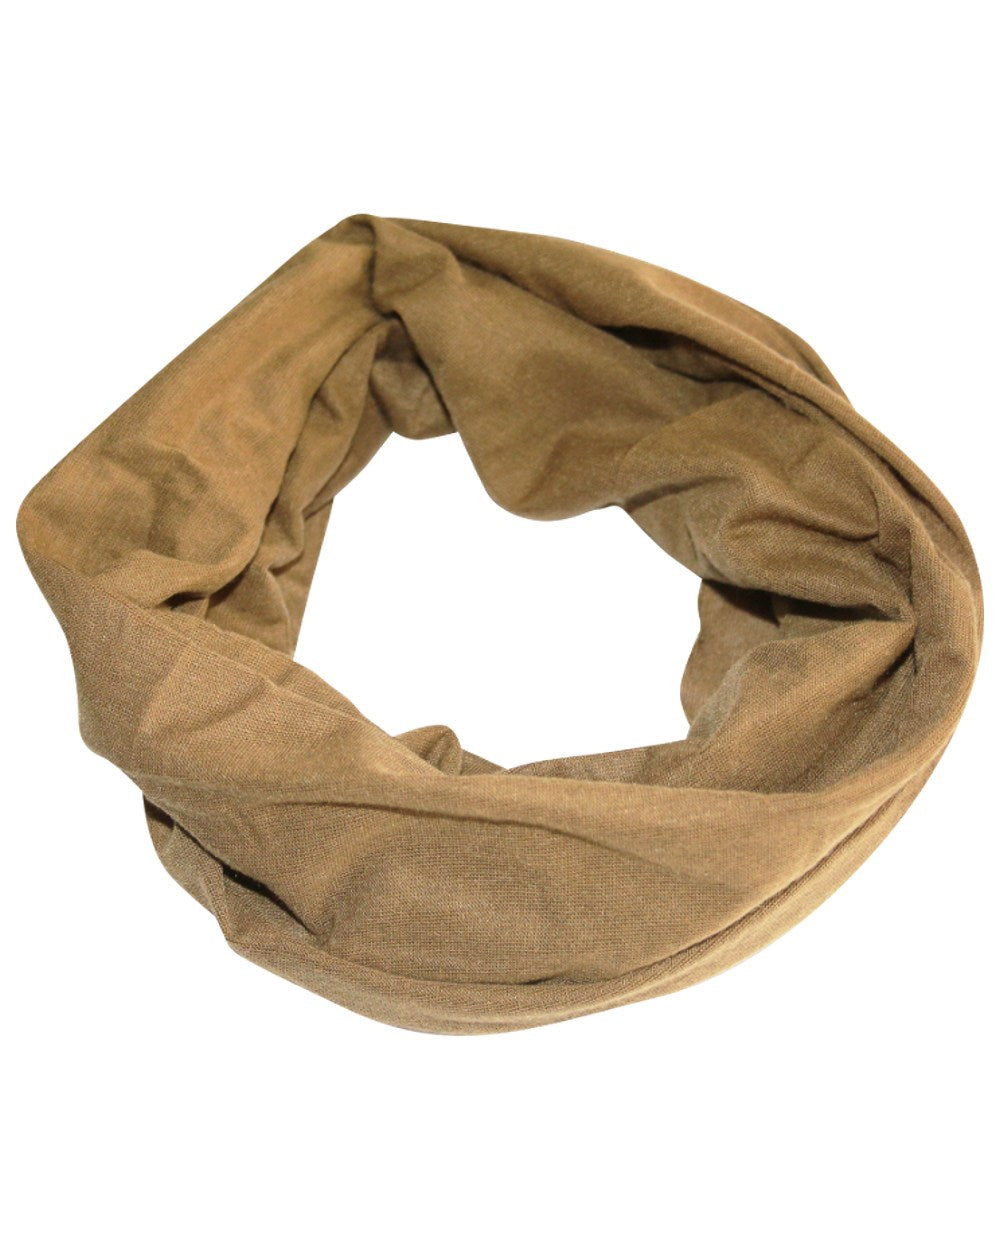 Viper Tactical Snood in Coyote 